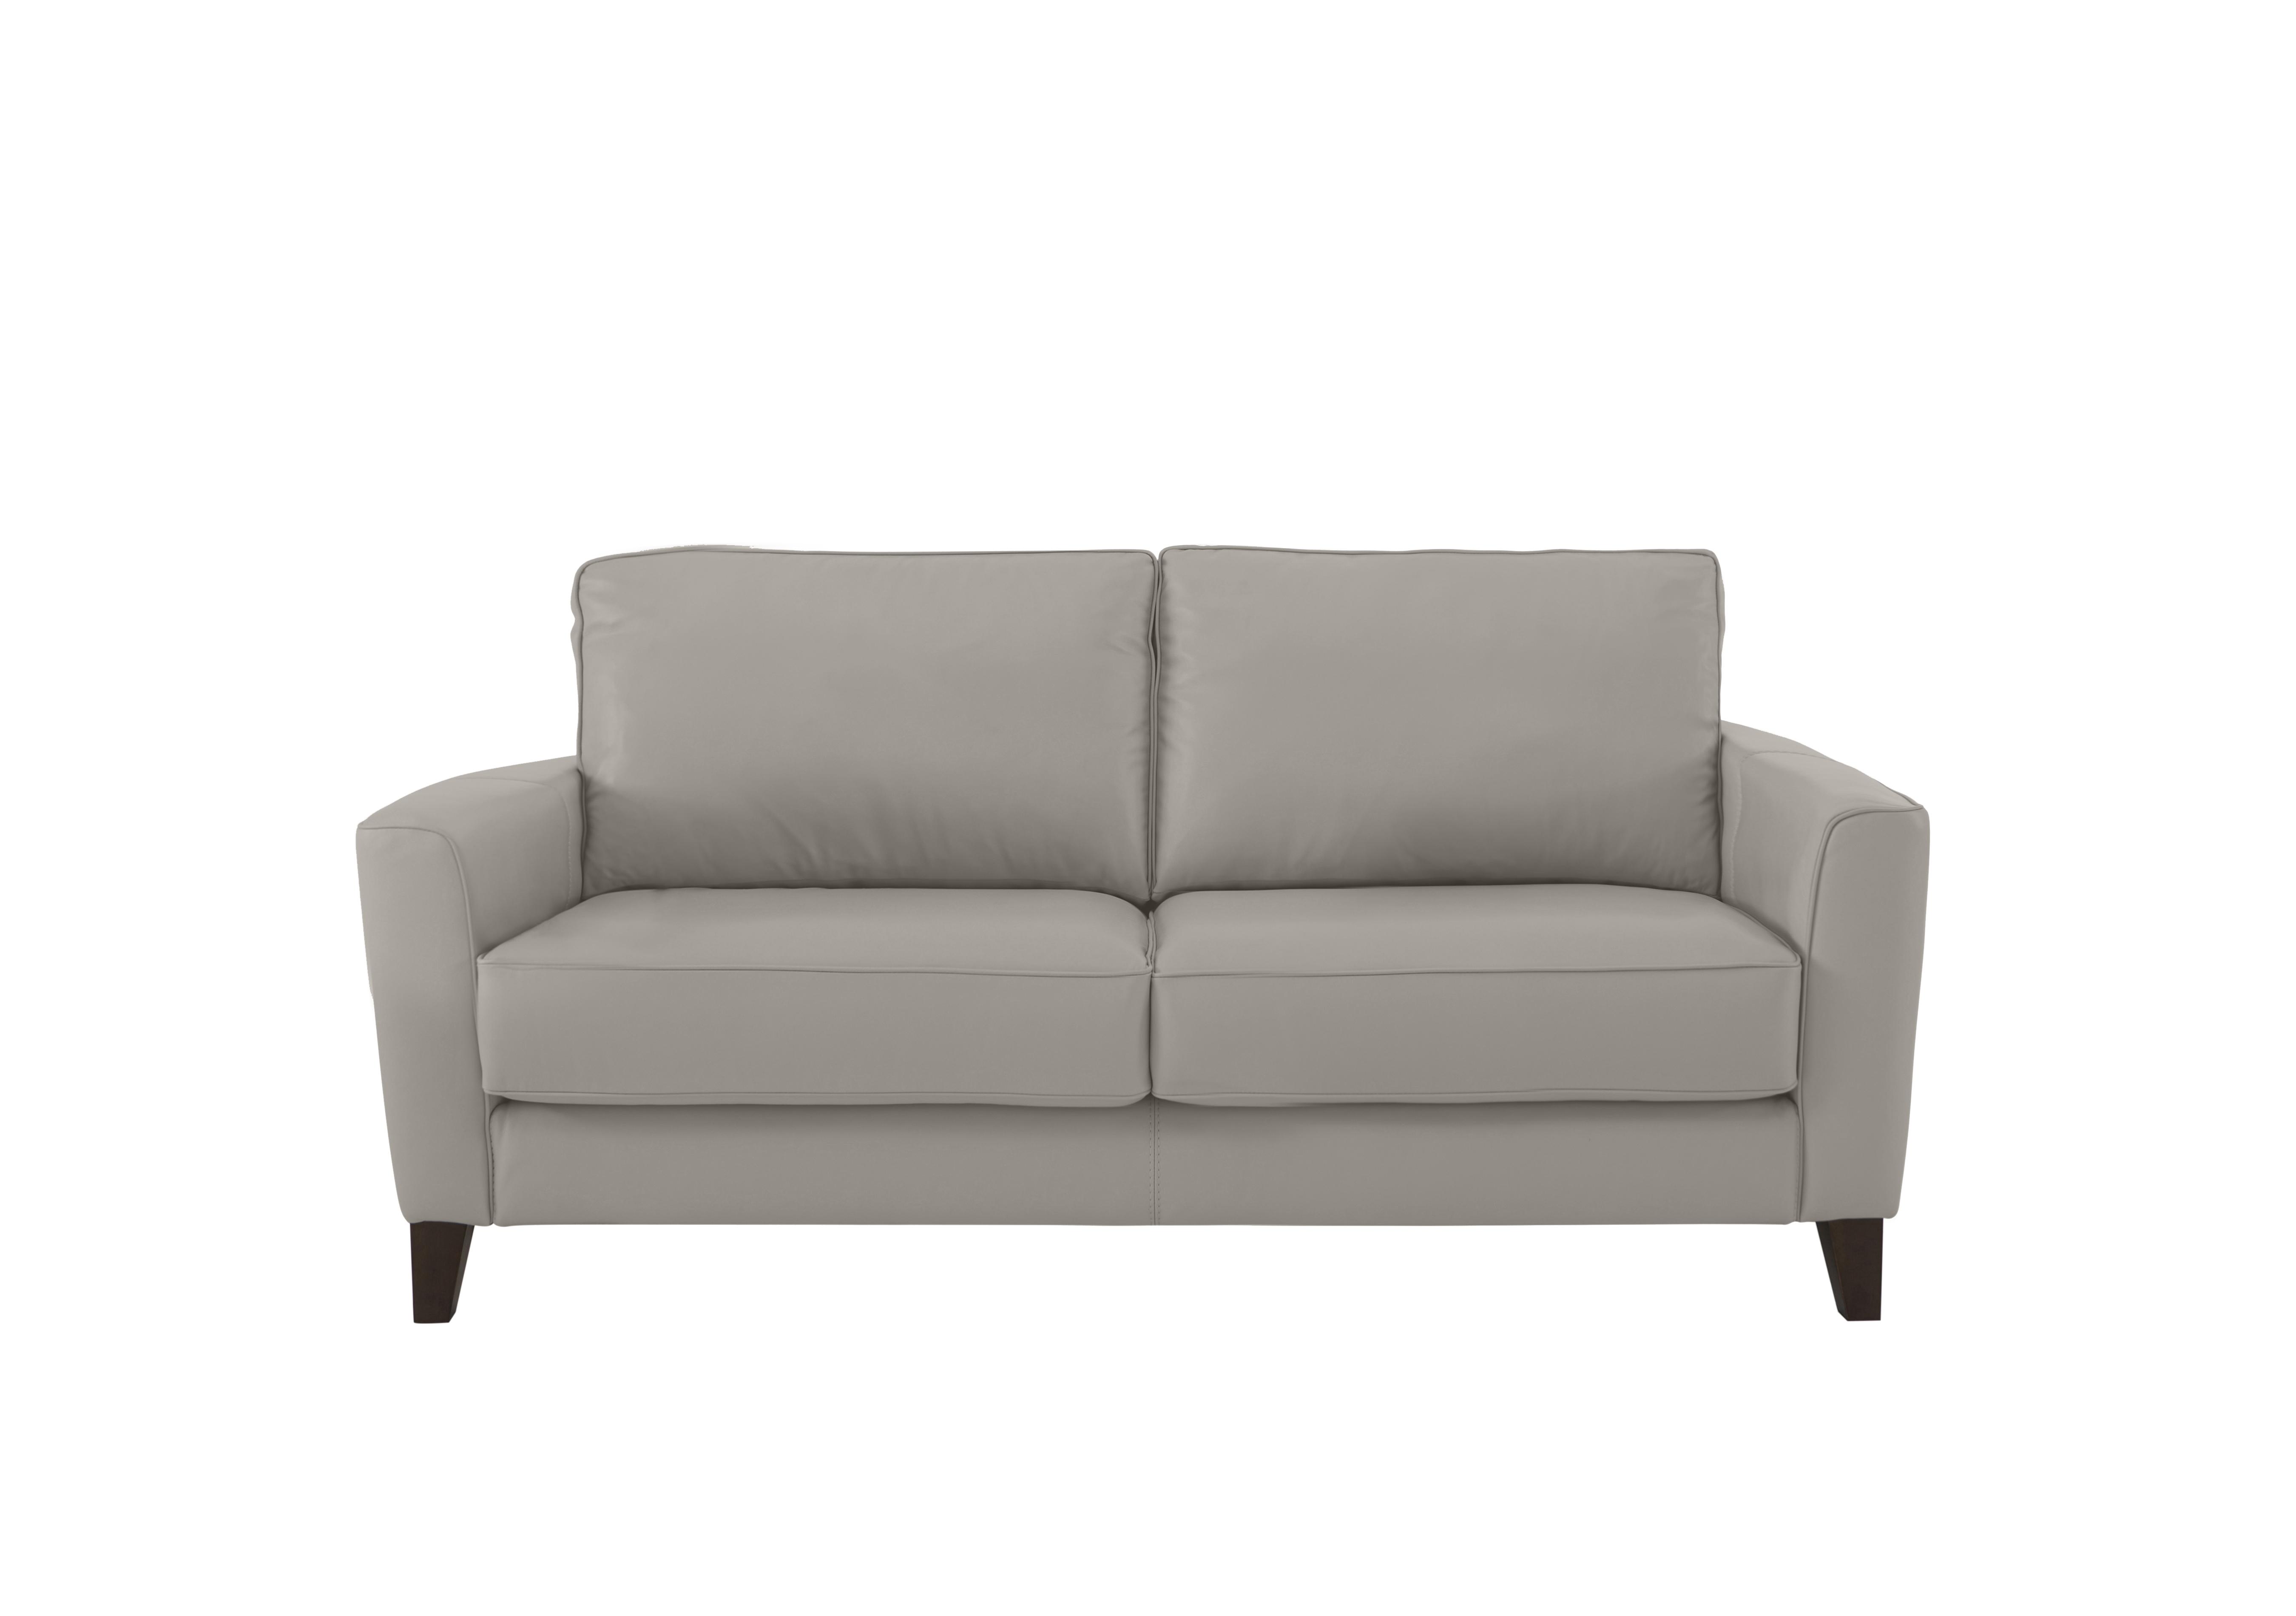 Brondby 2 Seater Leather Sofa in Bv-946b Silver Grey on Furniture Village